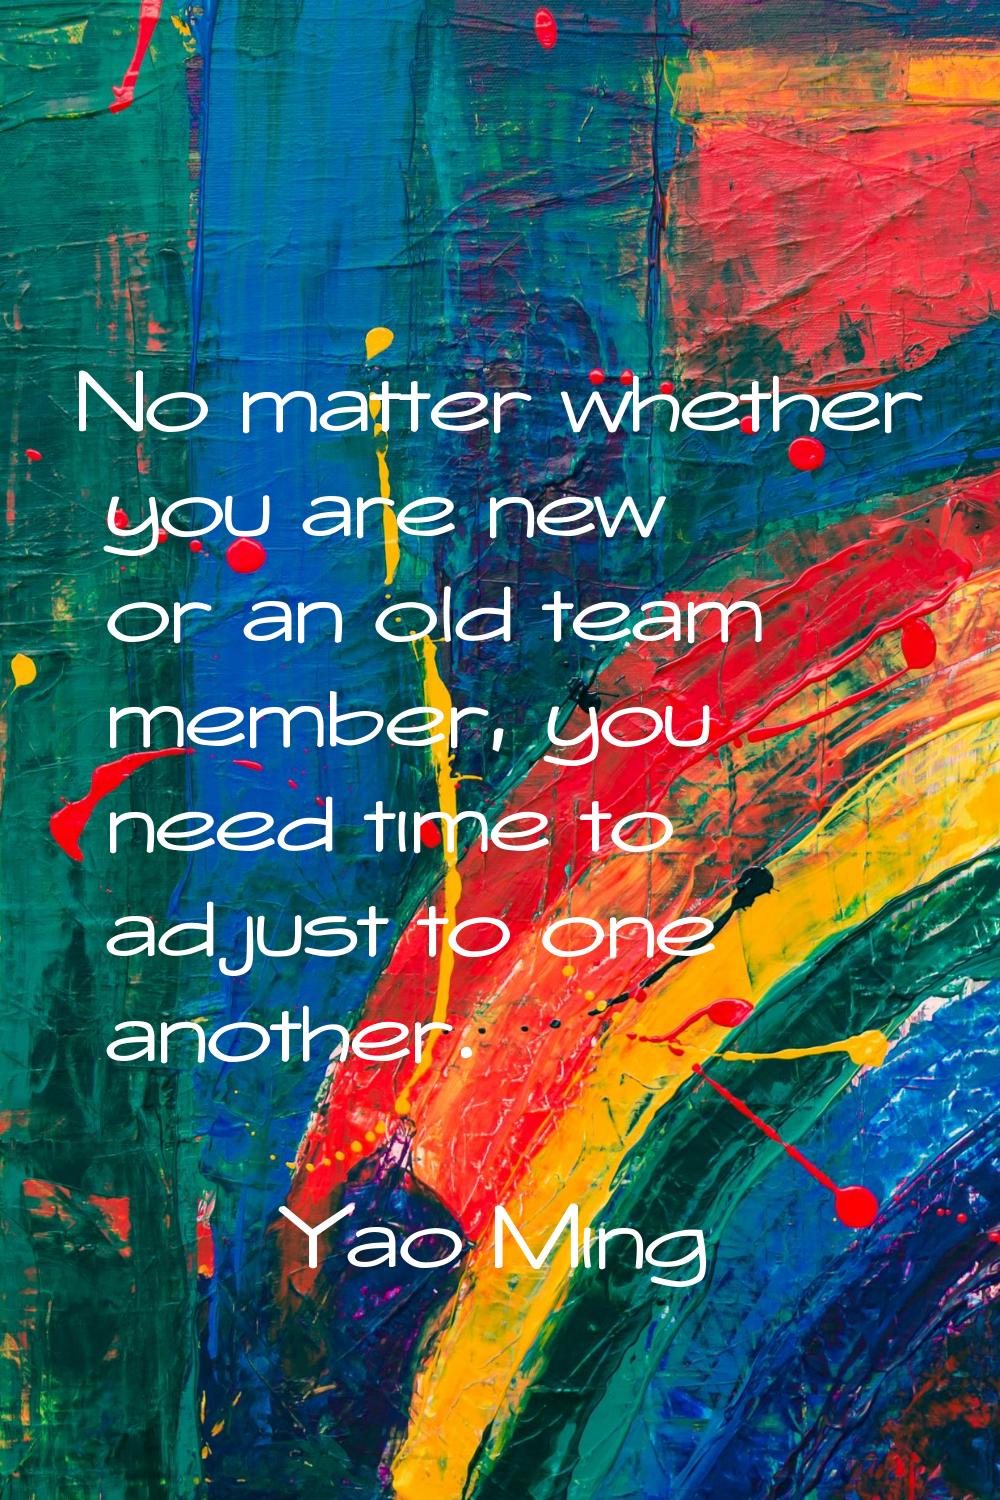 No matter whether you are new or an old team member, you need time to adjust to one another.